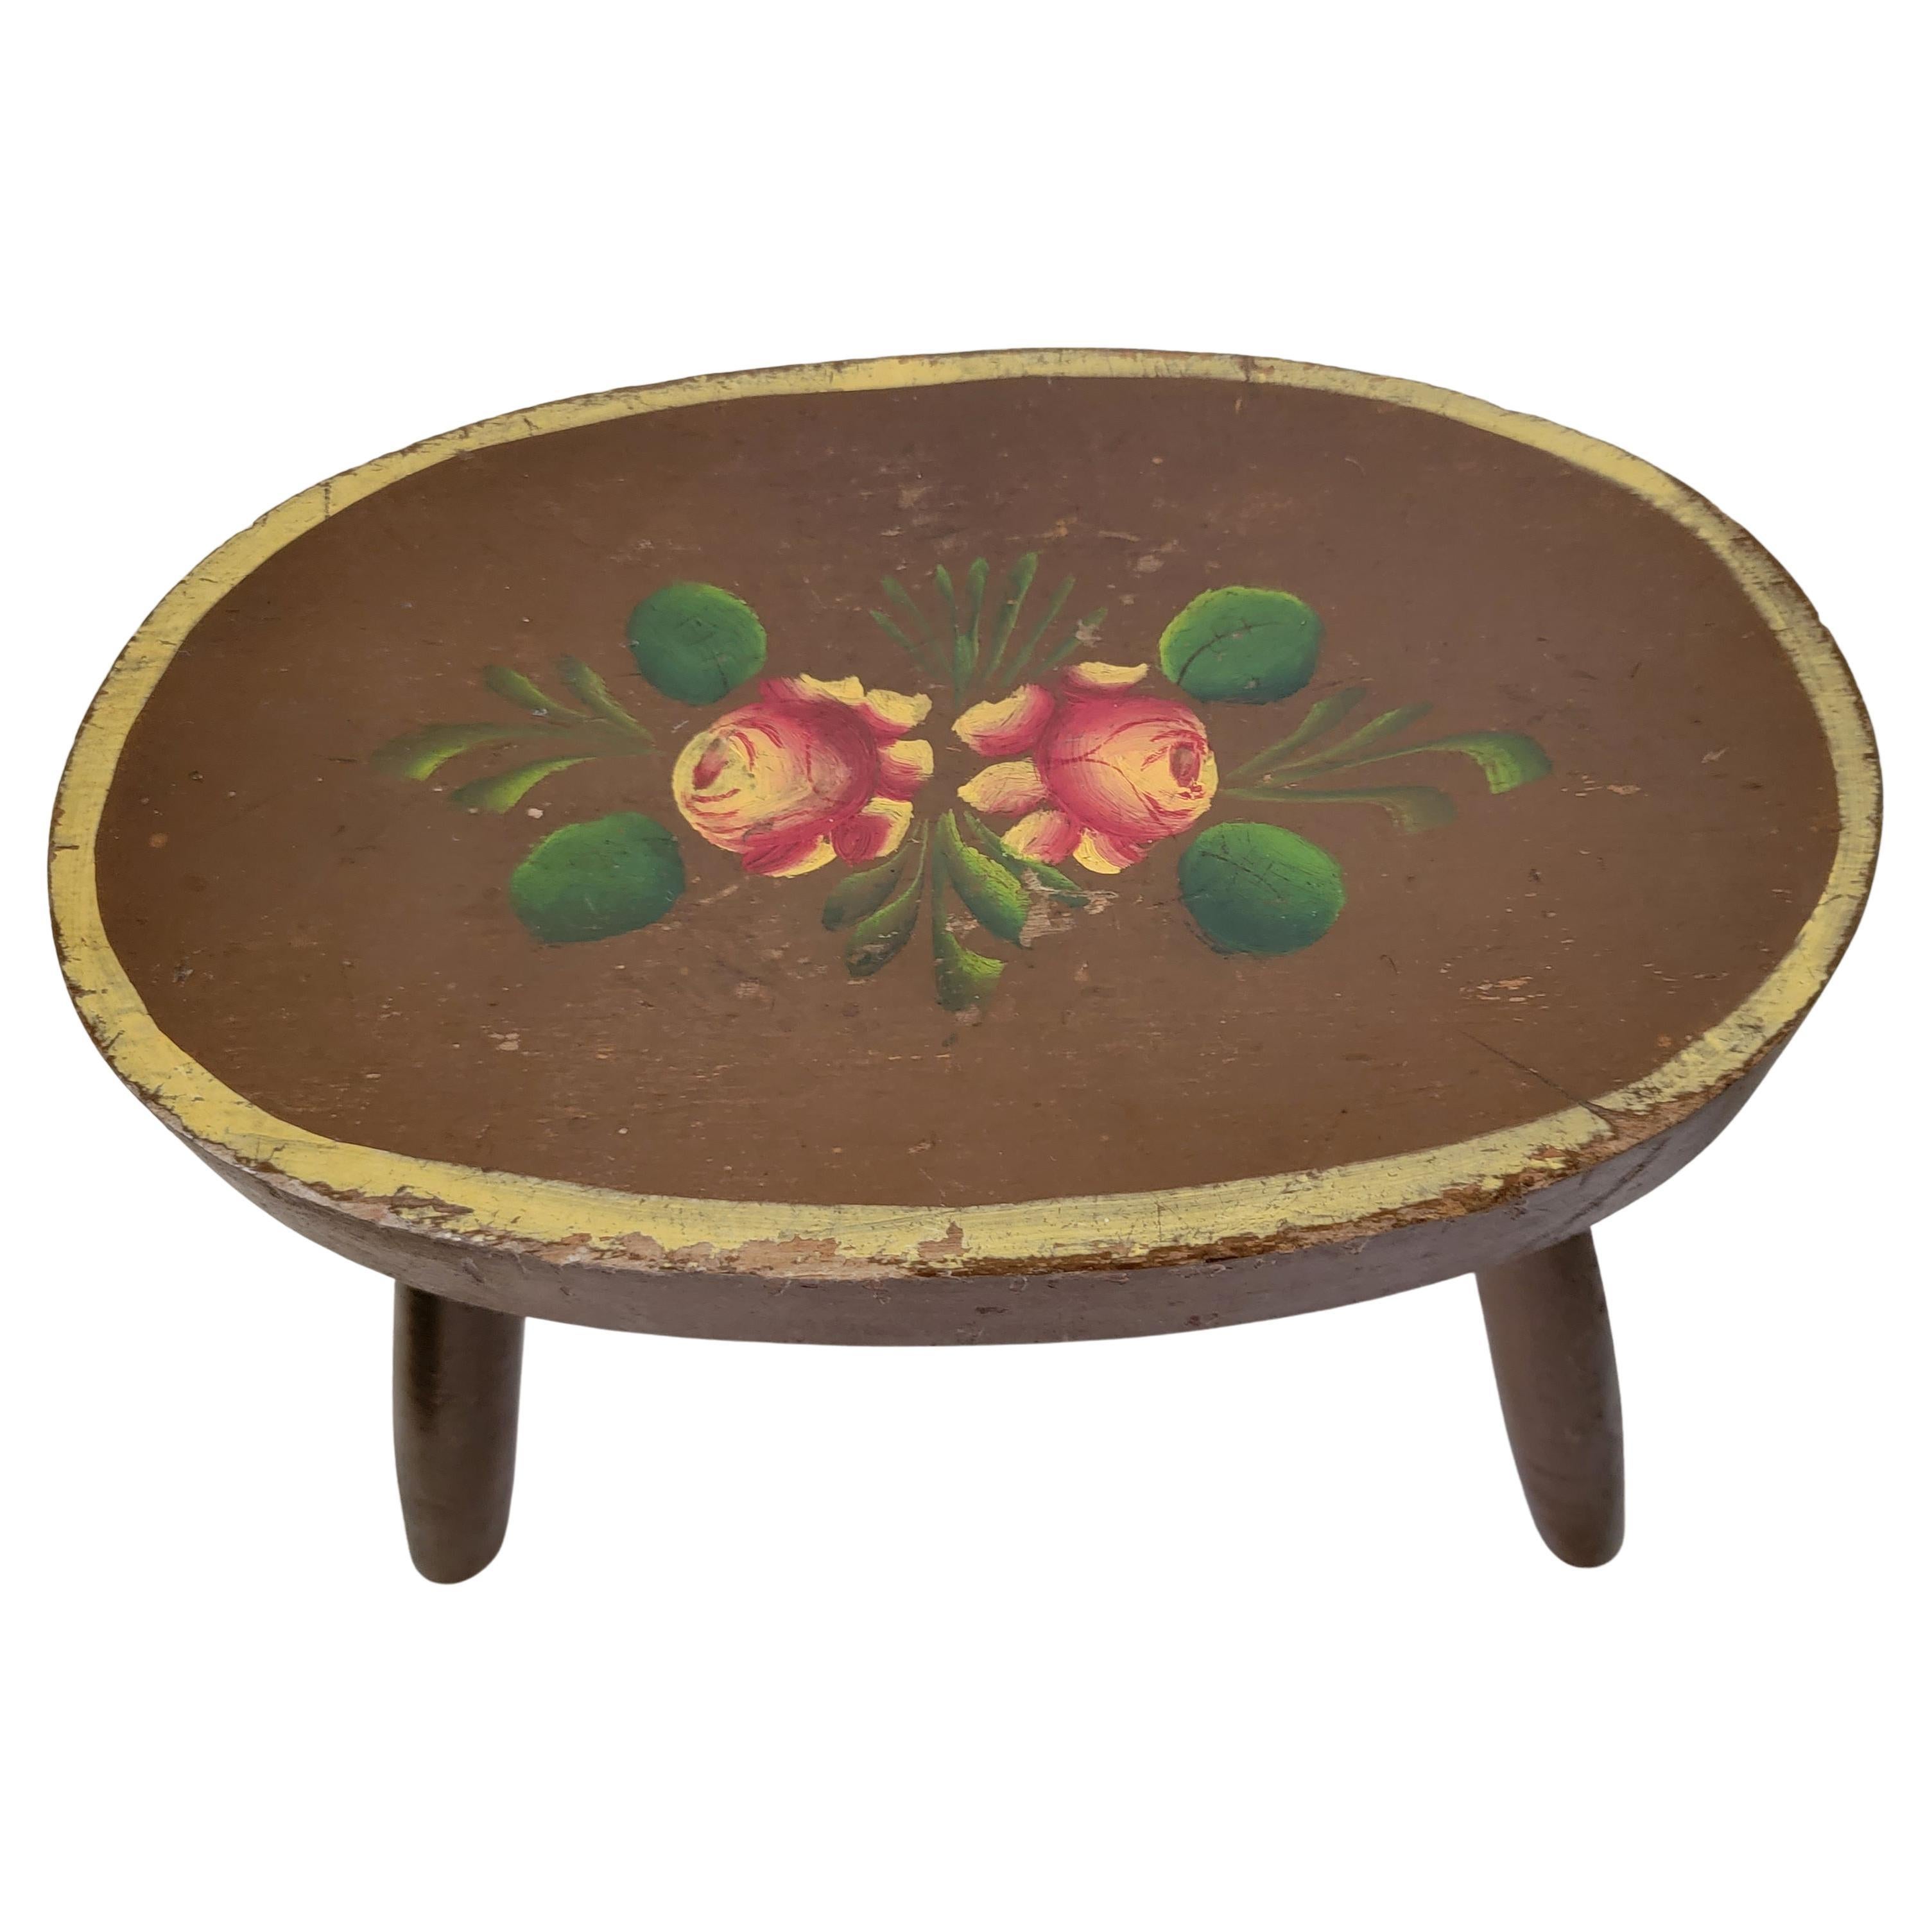 Late 20th C Original Painted Oval Floral Stool